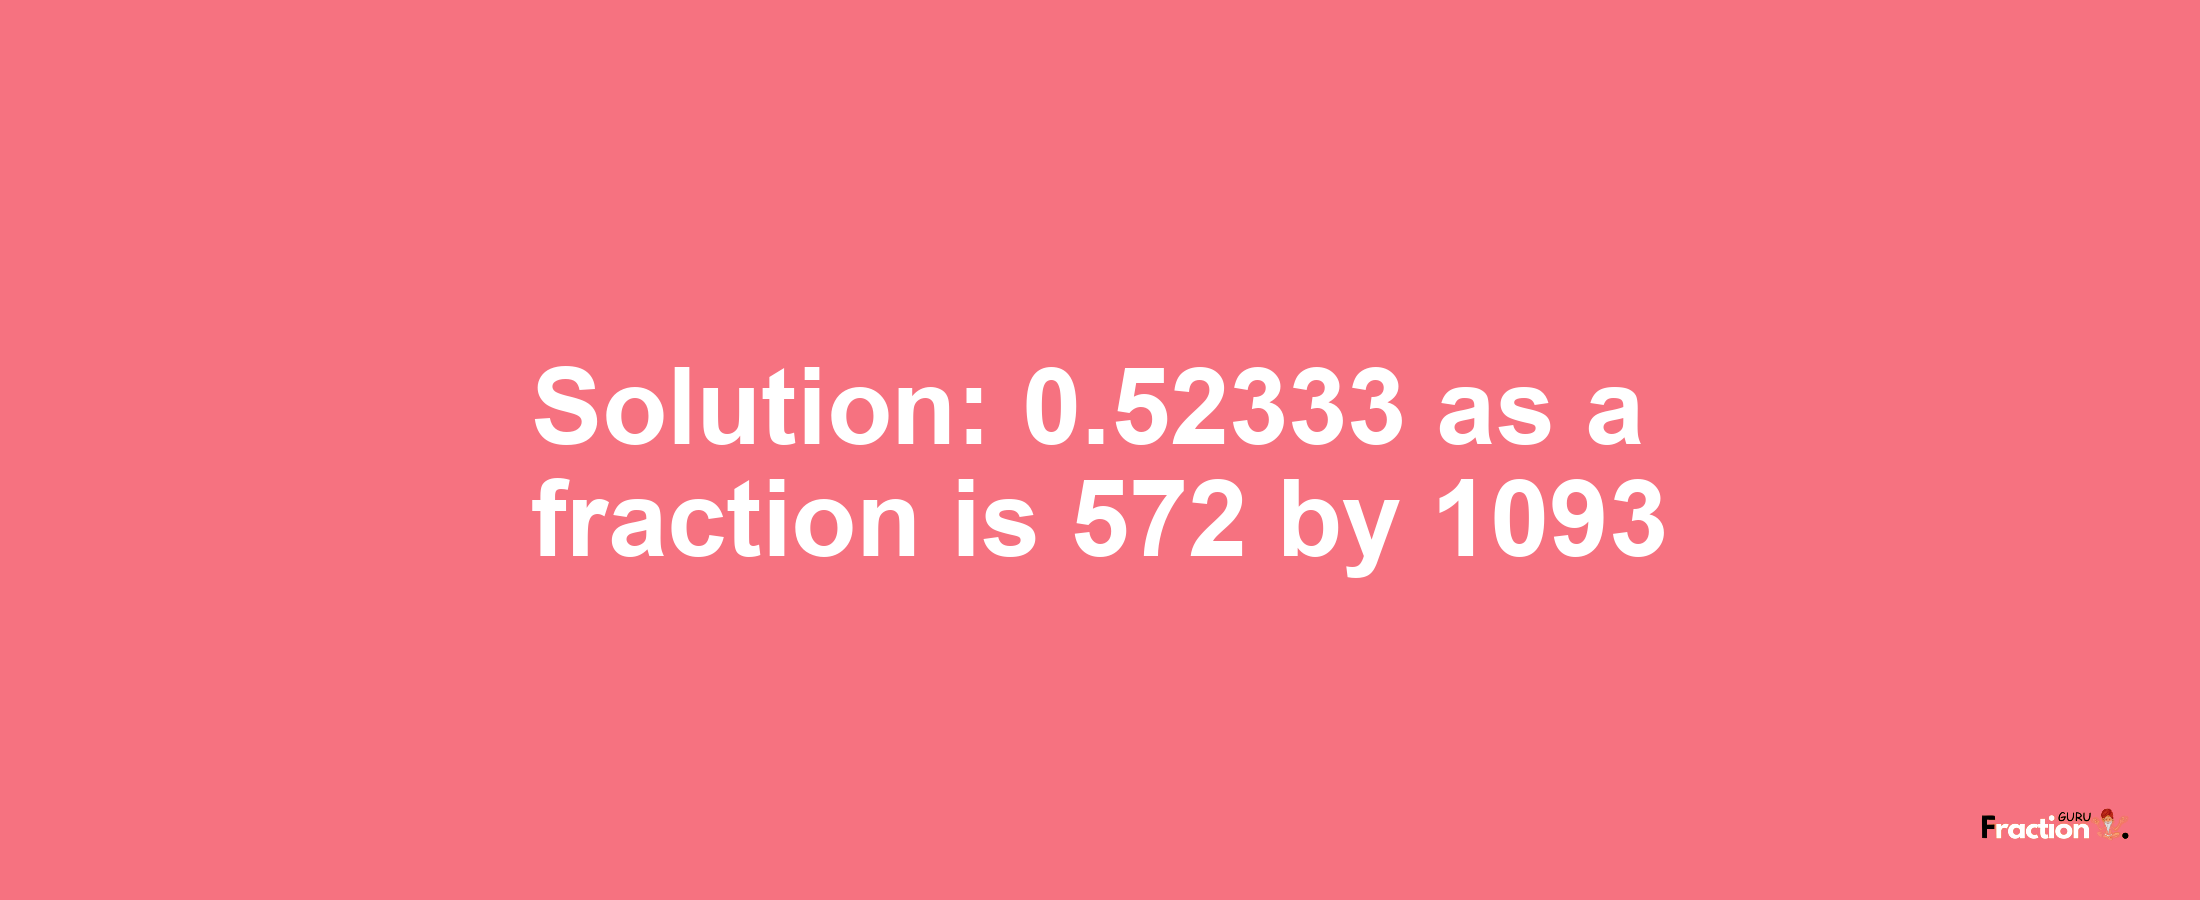 Solution:0.52333 as a fraction is 572/1093